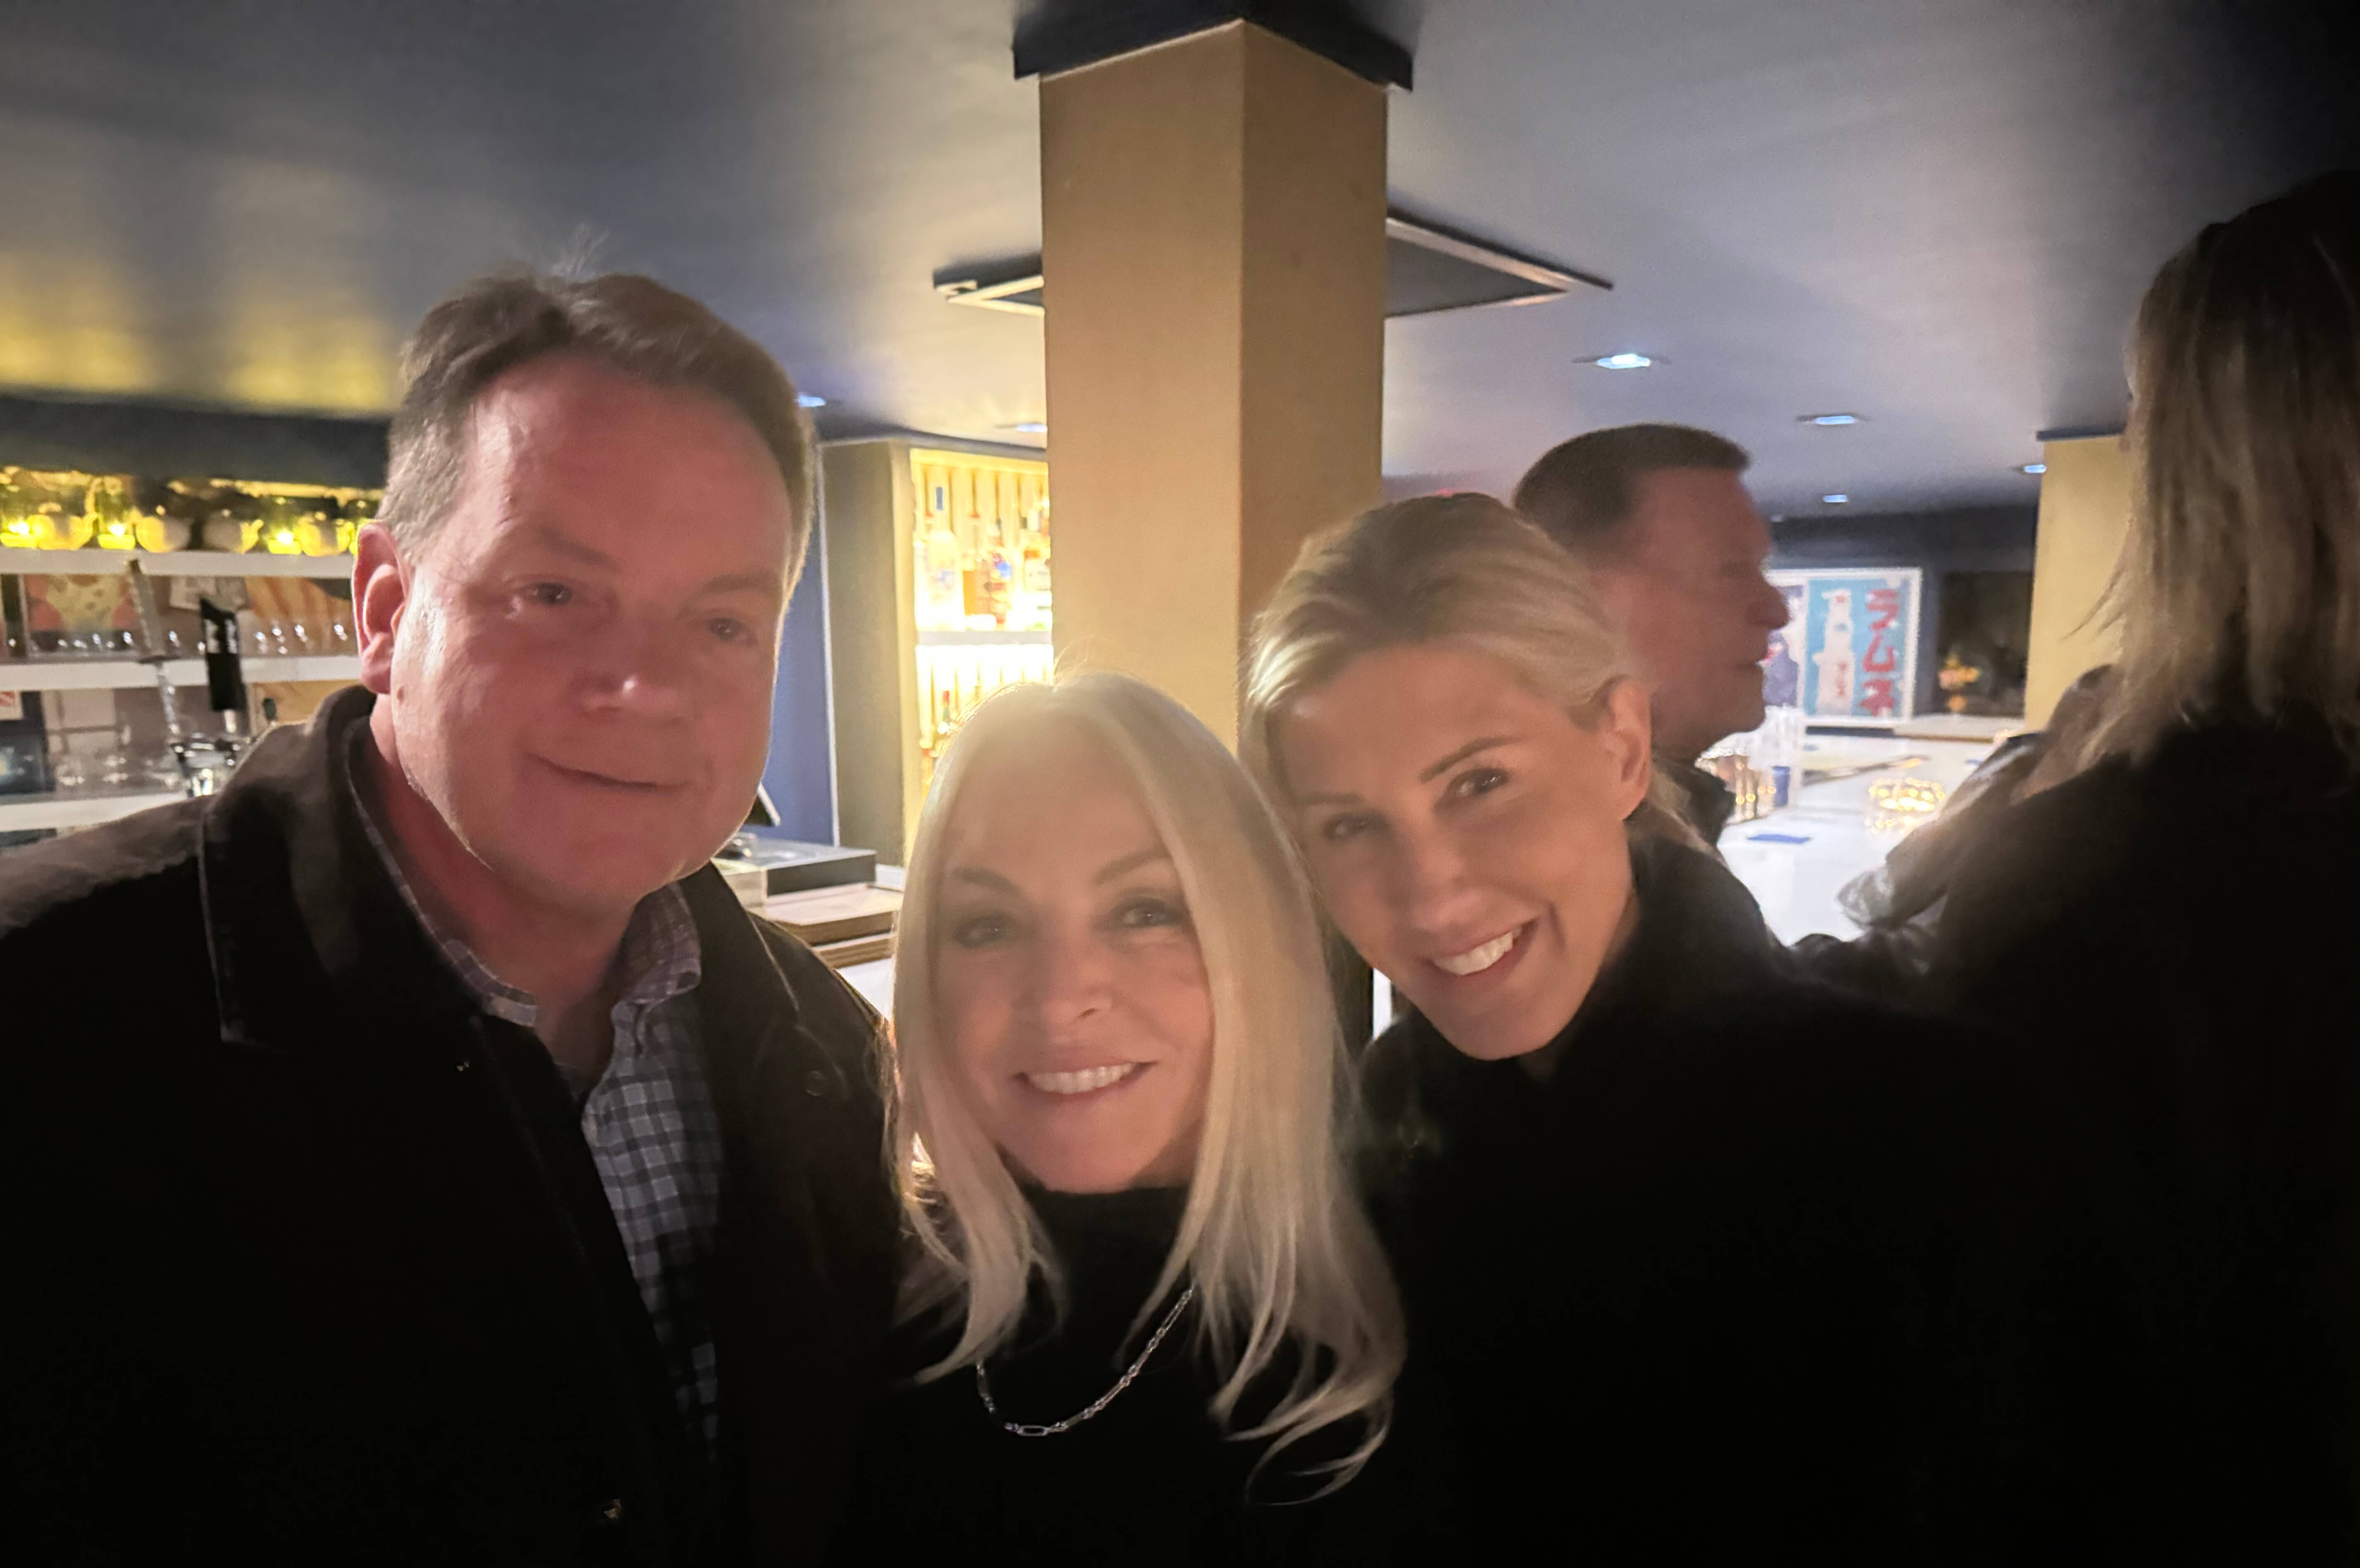 East HAMPTON VILLAGE Mayor Jerry Larsen with his wife Lisa Larsen and a friend at Kizzy Tavern